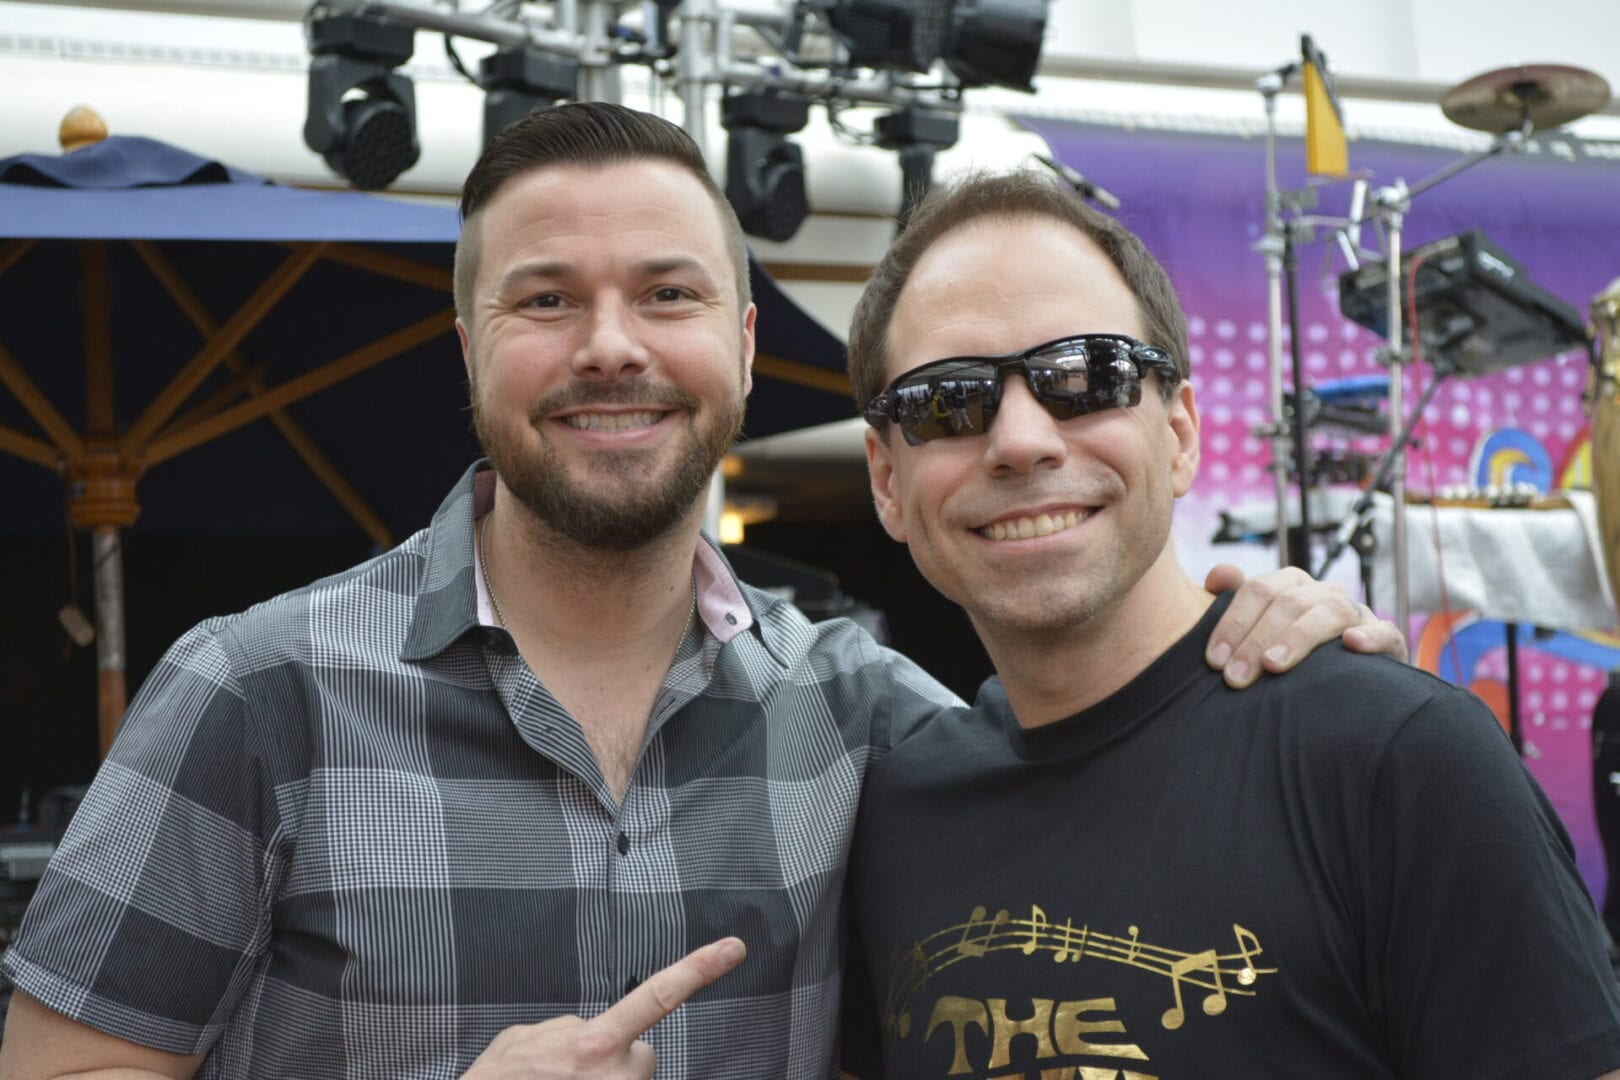 Two men posing for a picture at an event.